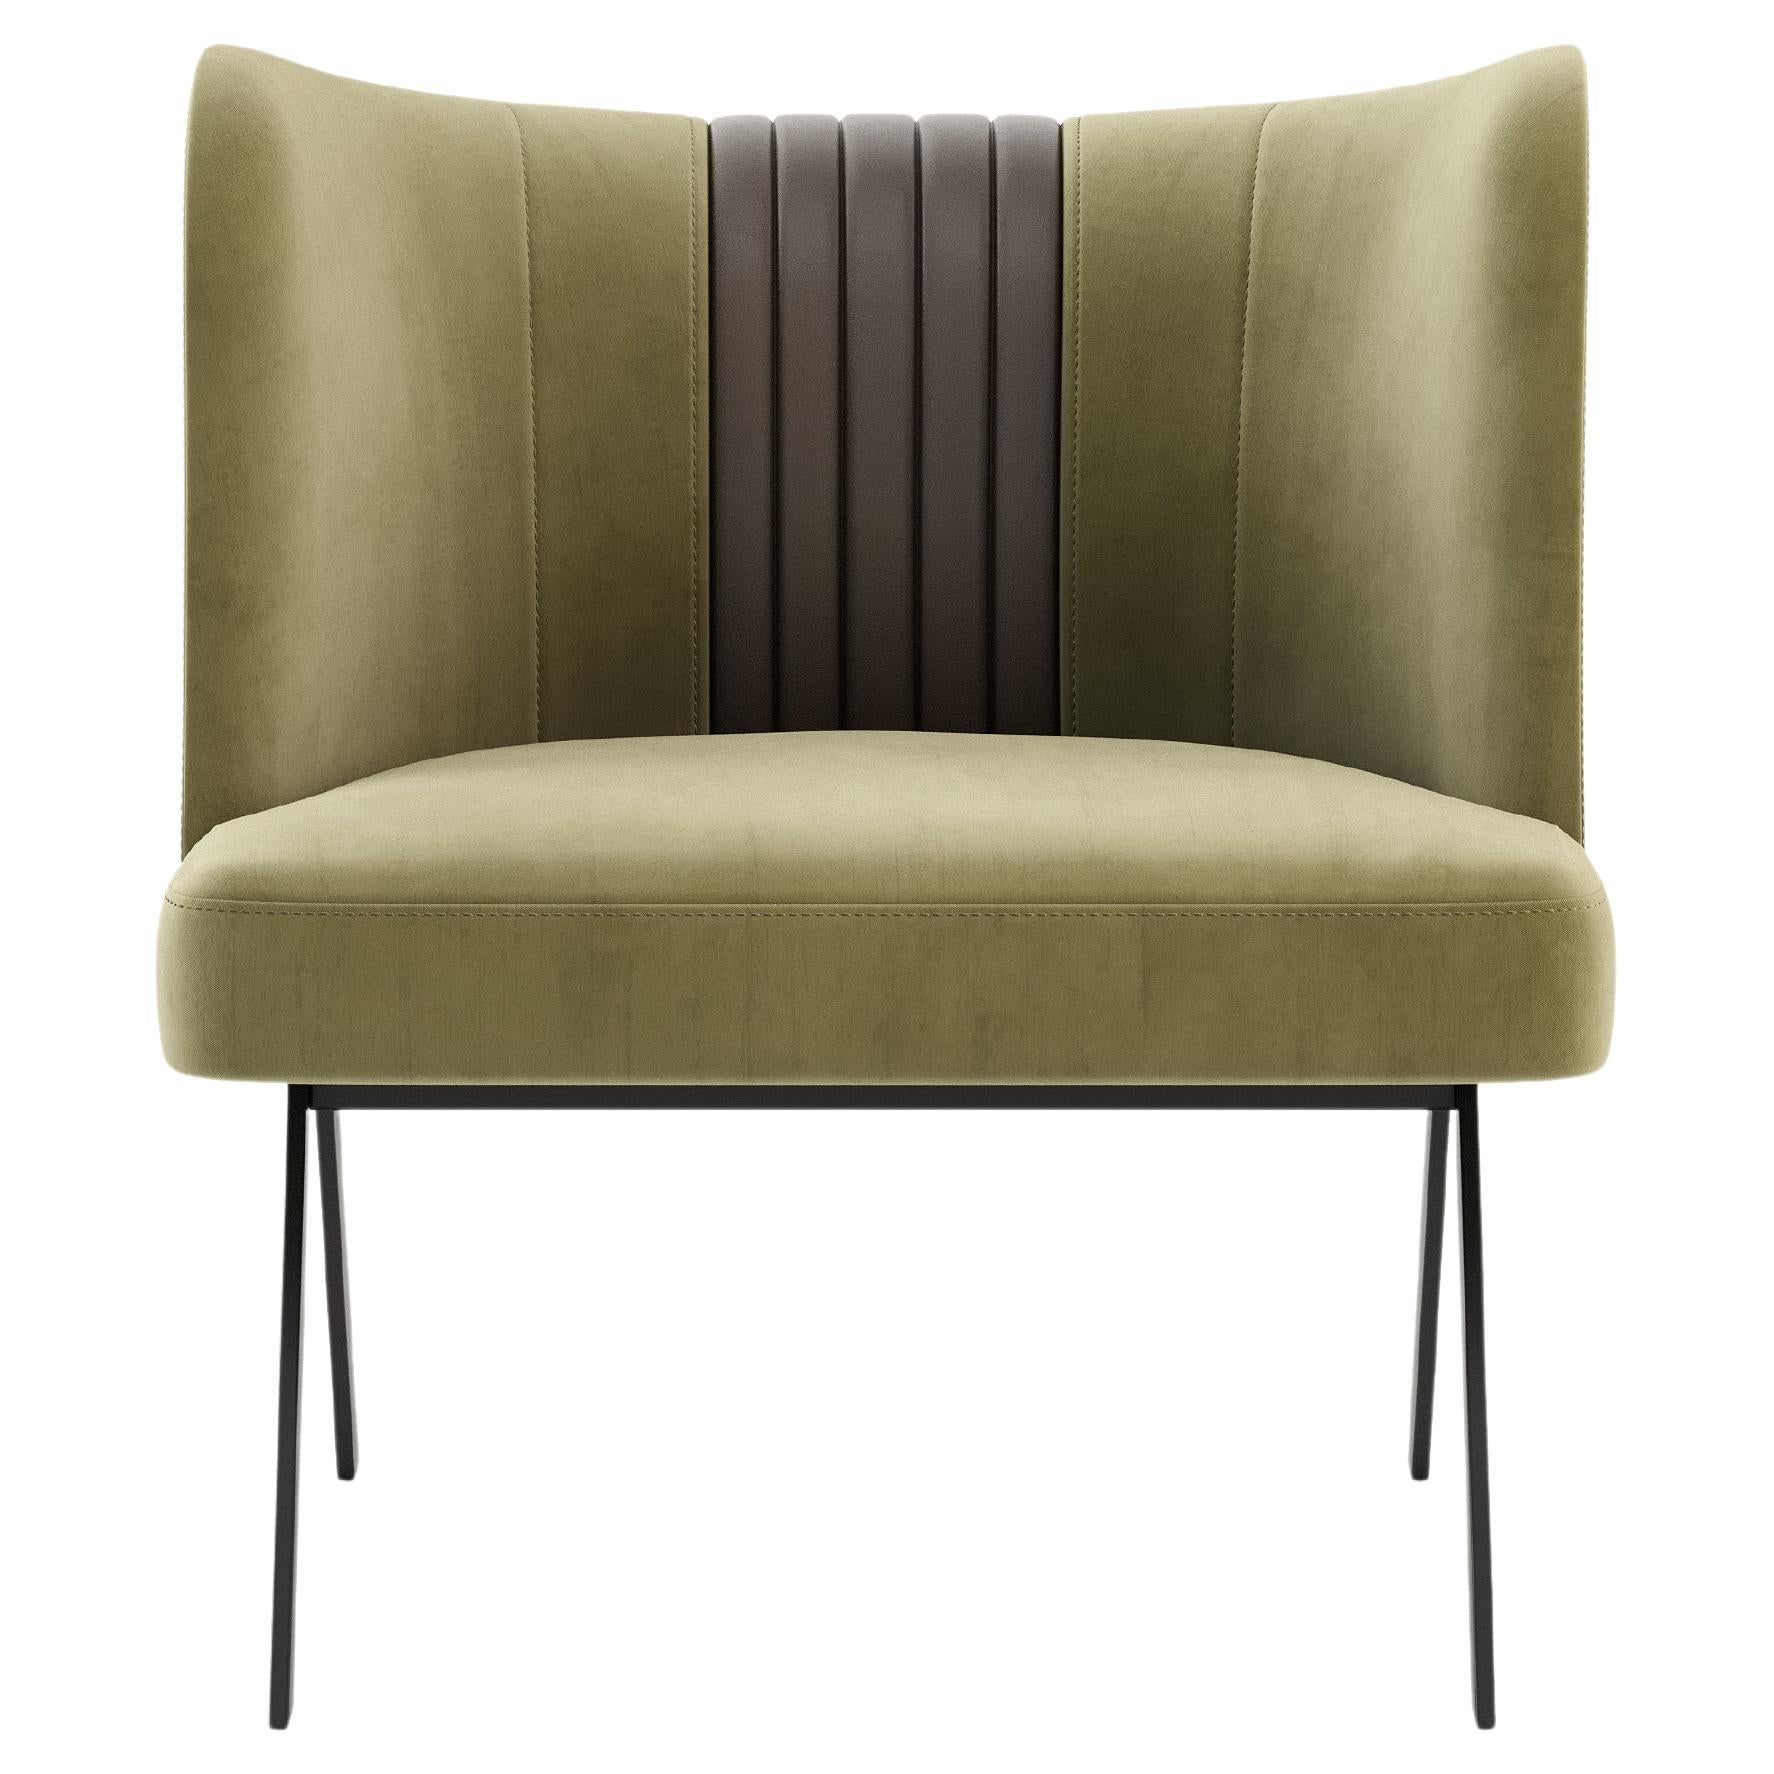 Gordon Armchair, Portuguese 21st Century Contemporary Upholstered with Leather